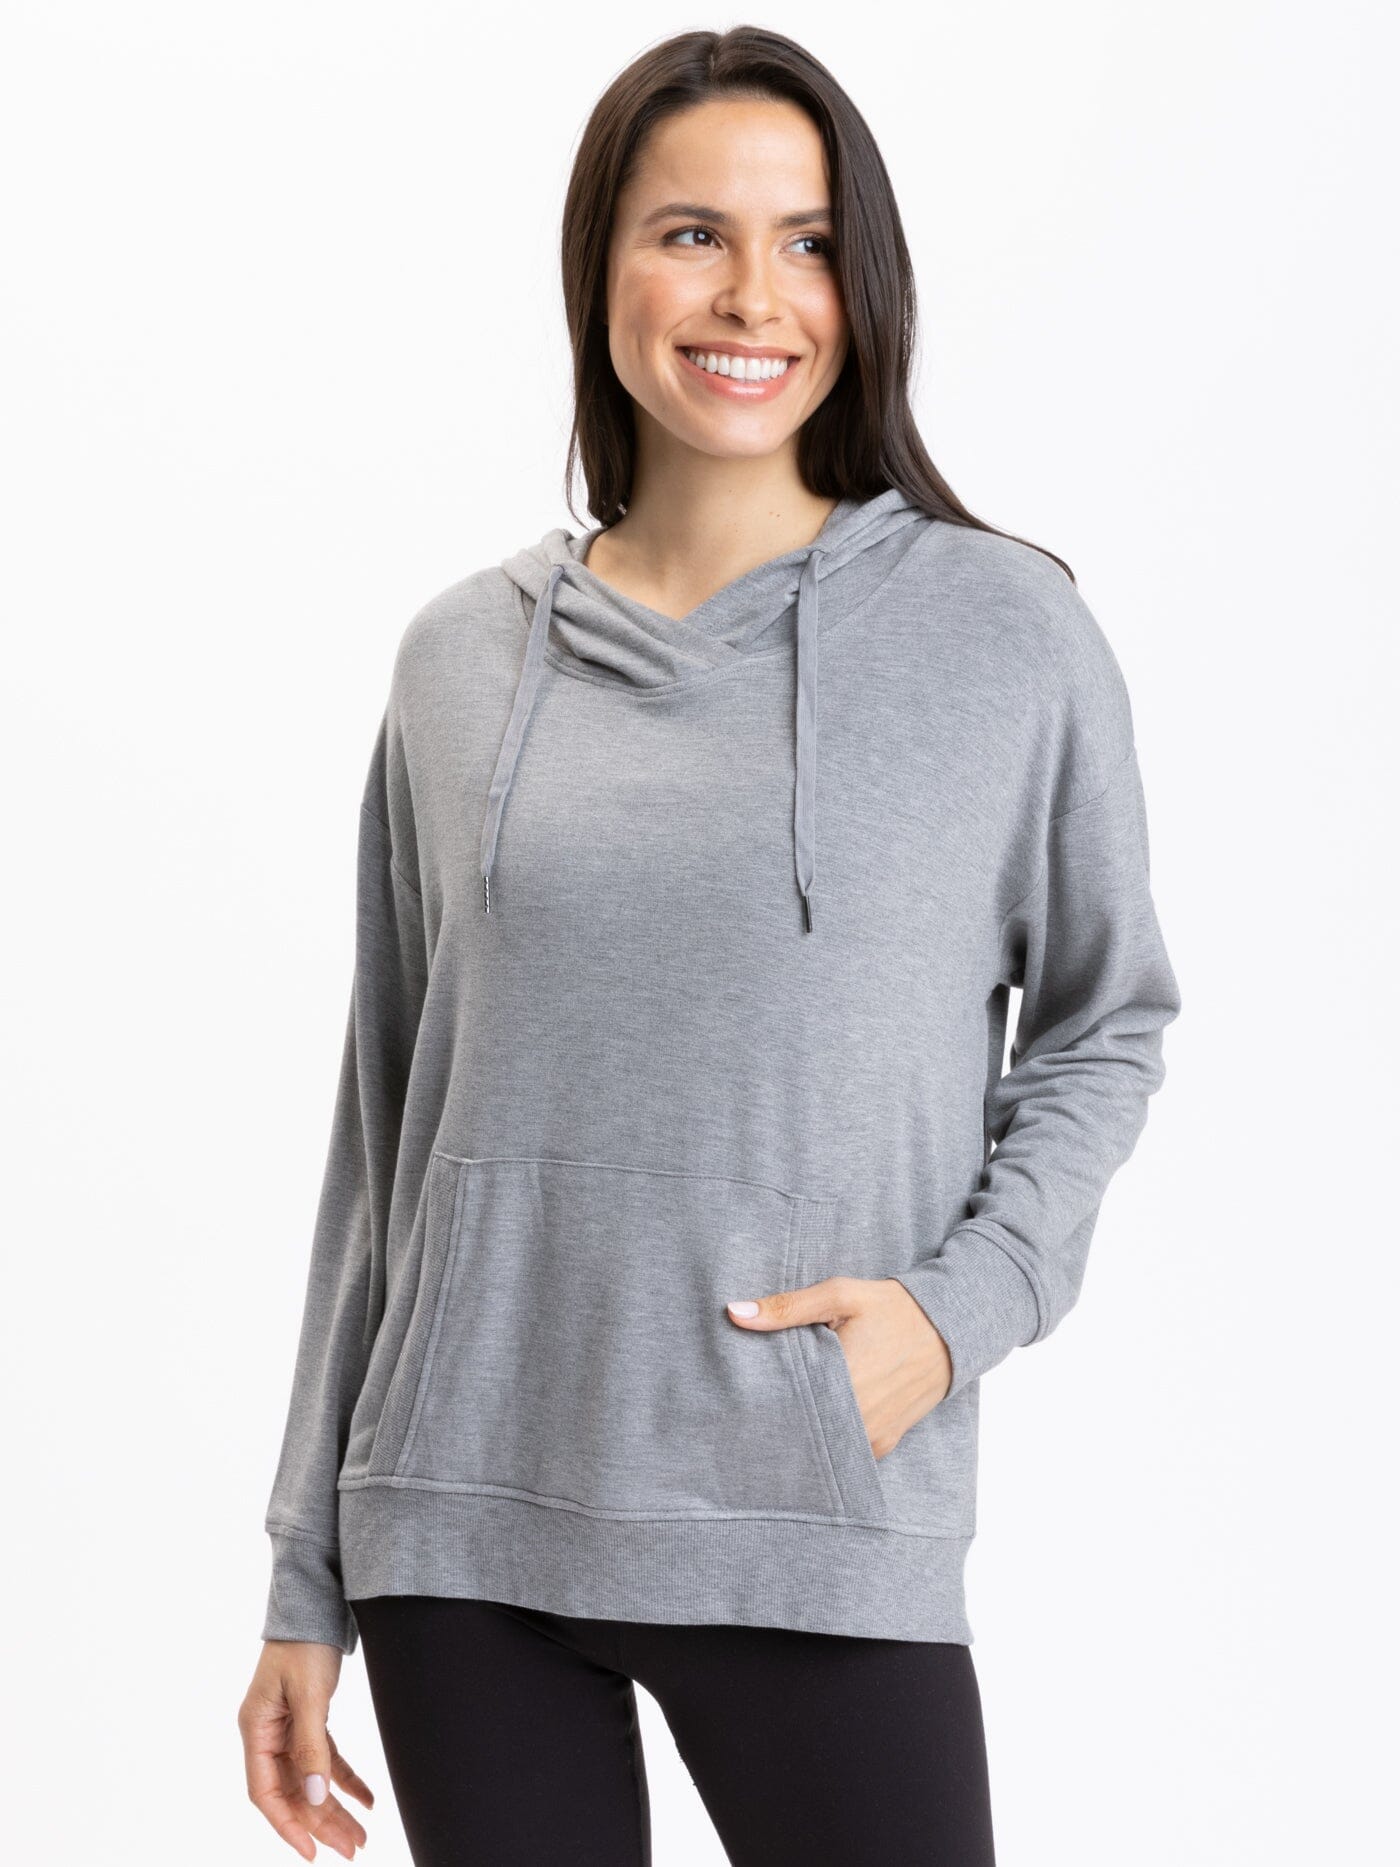 Women's Best Sellers – Threads 4 Thought